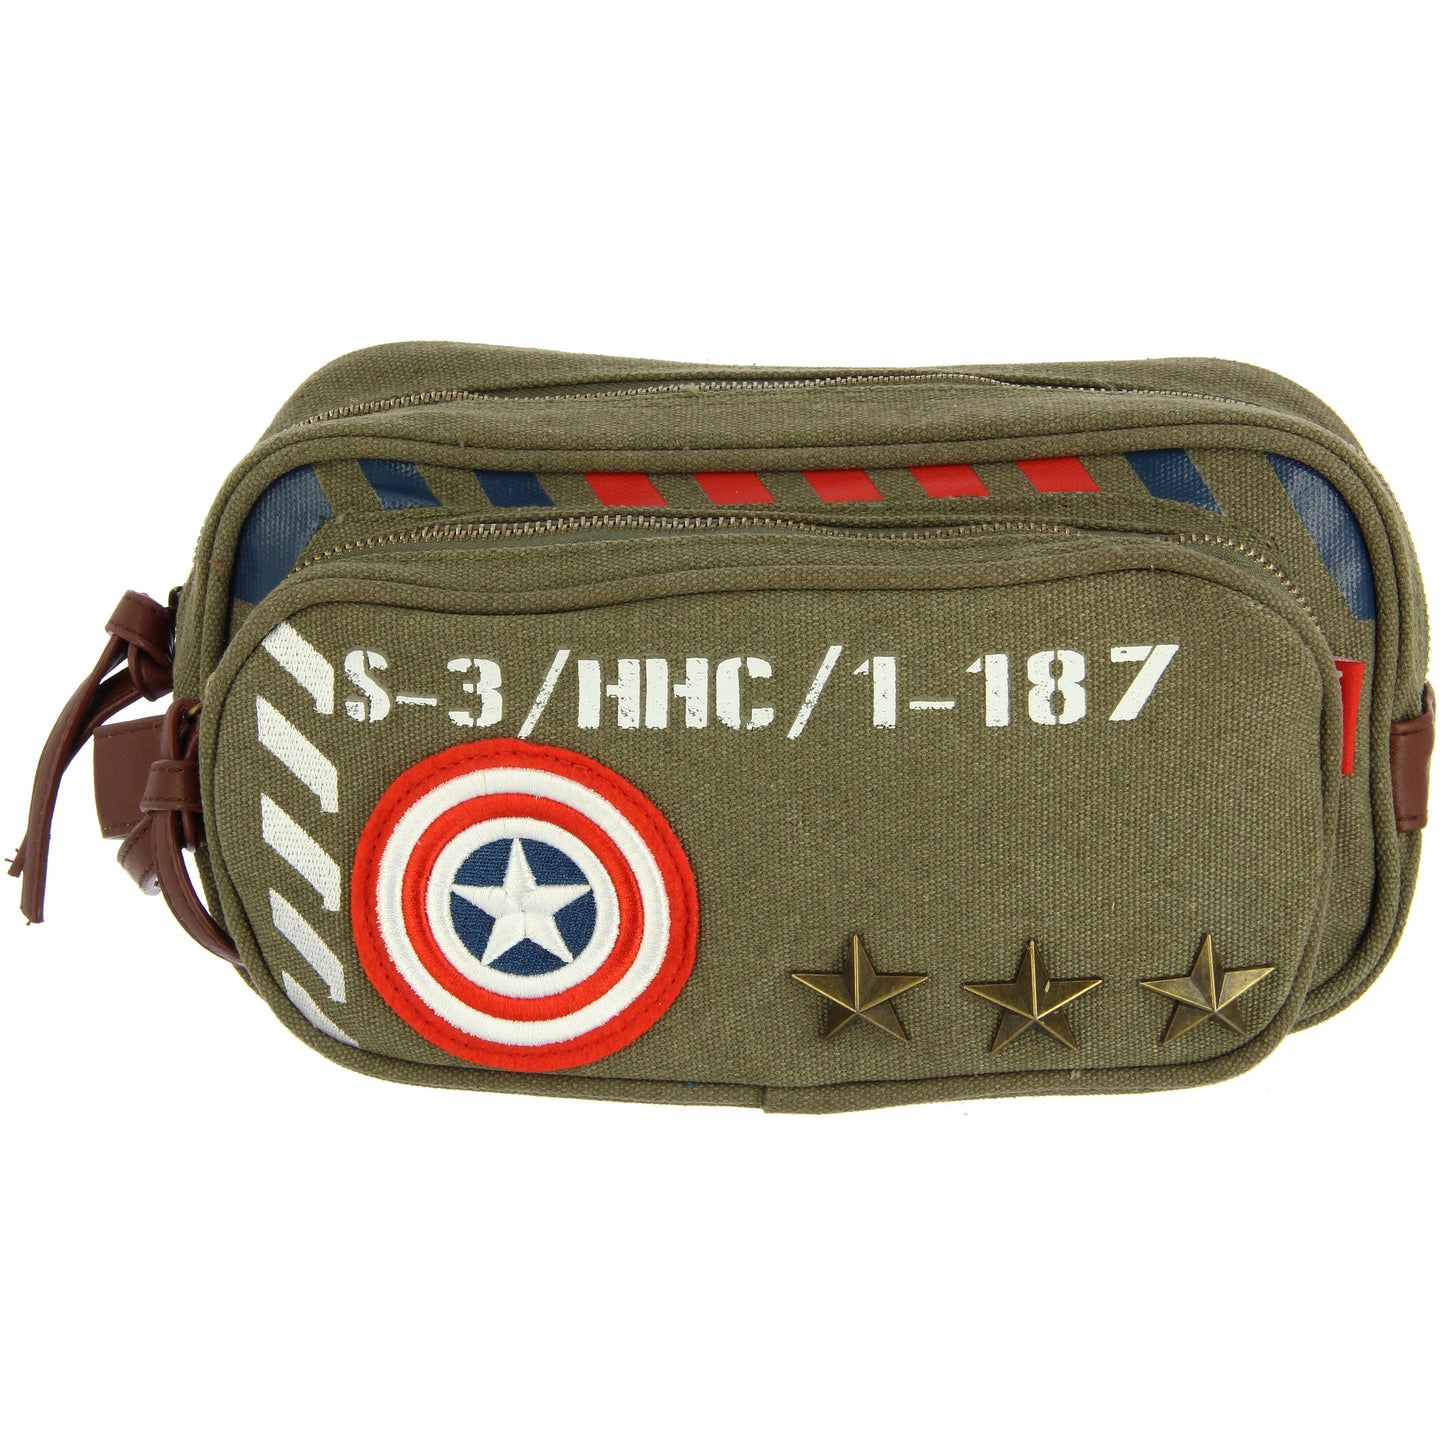 On Sale- Beyondtrend - Captain America Vintage Military Army Toiletry Bag